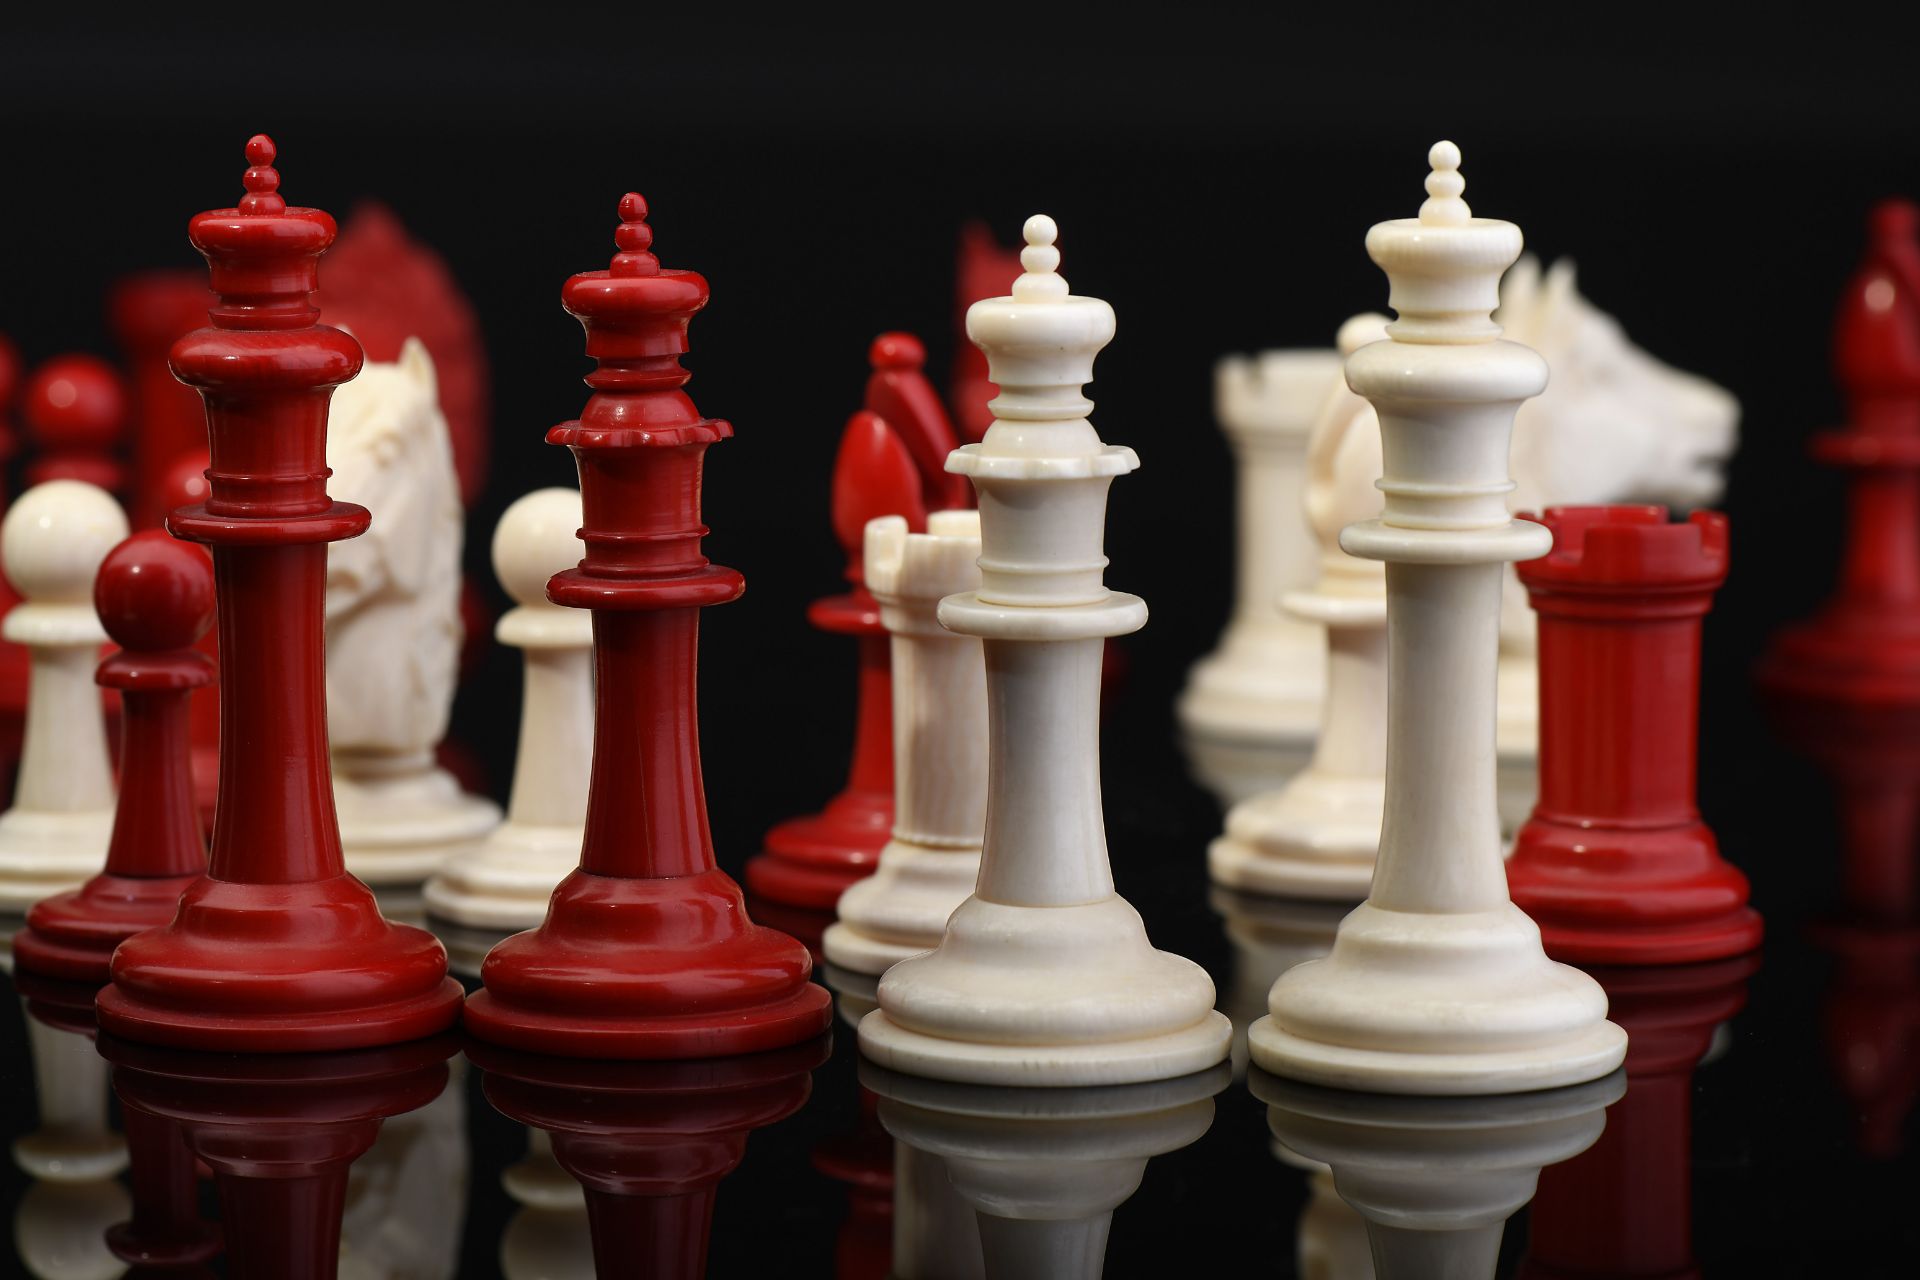 Chess pieces - Image 5 of 7